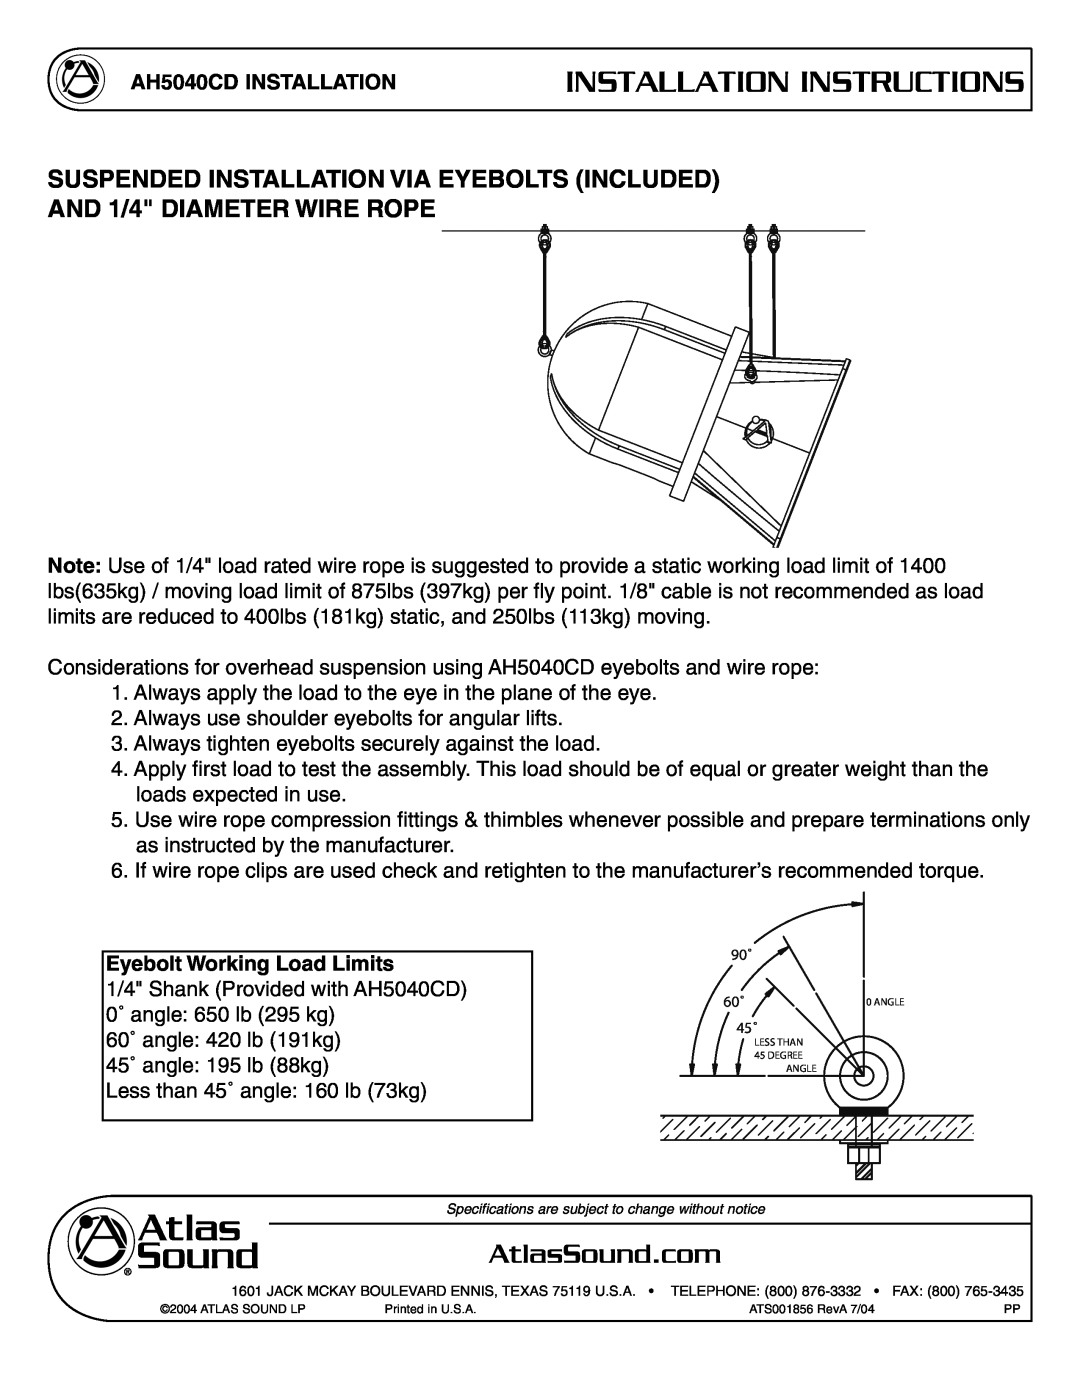 Atlas Sound AH5040CD Suspended Installation Via Eyebolts Included, AND 1/4 DIAMETER WIRE ROPE, Installation Instructions 